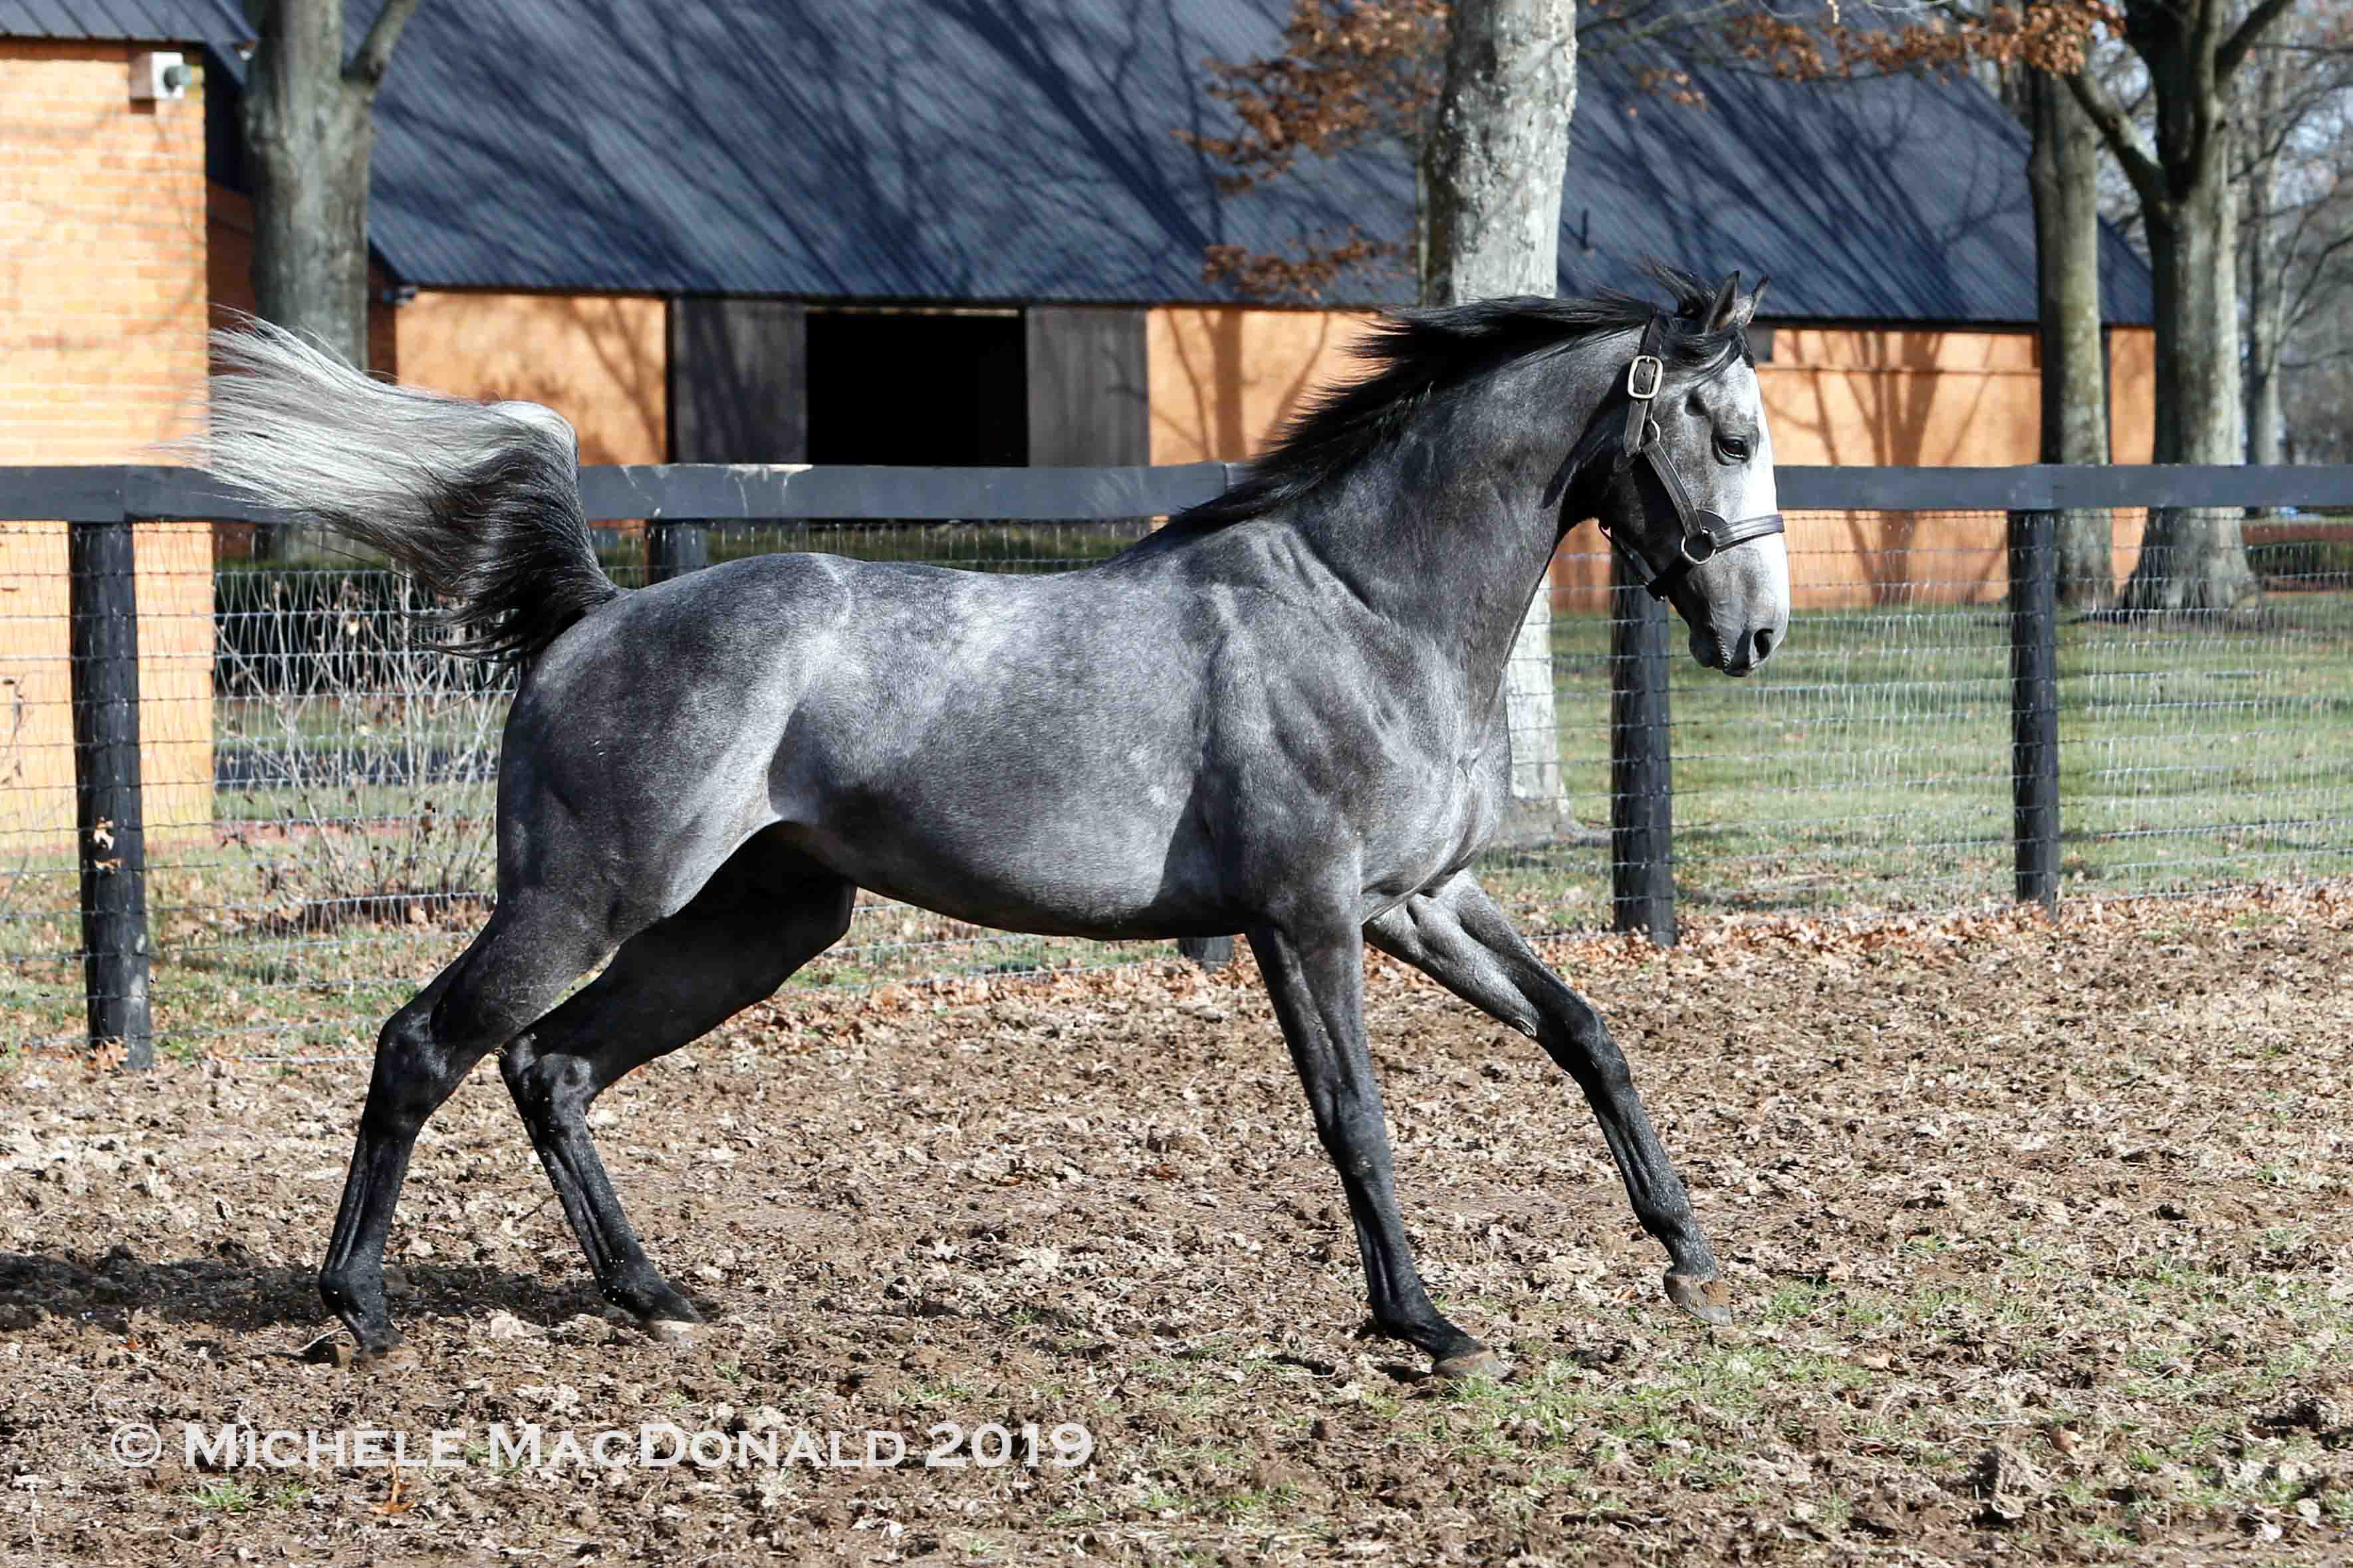 Arrogate: “He can get bored out in the paddock after a while,” says  Juddmonte’s Garrett O’Rourke. “Yet, when he got his test mares bred in January, and mares started to arrive at the breeding shed in February, he was just loving being busy again.” Photo: Michele MacDonald